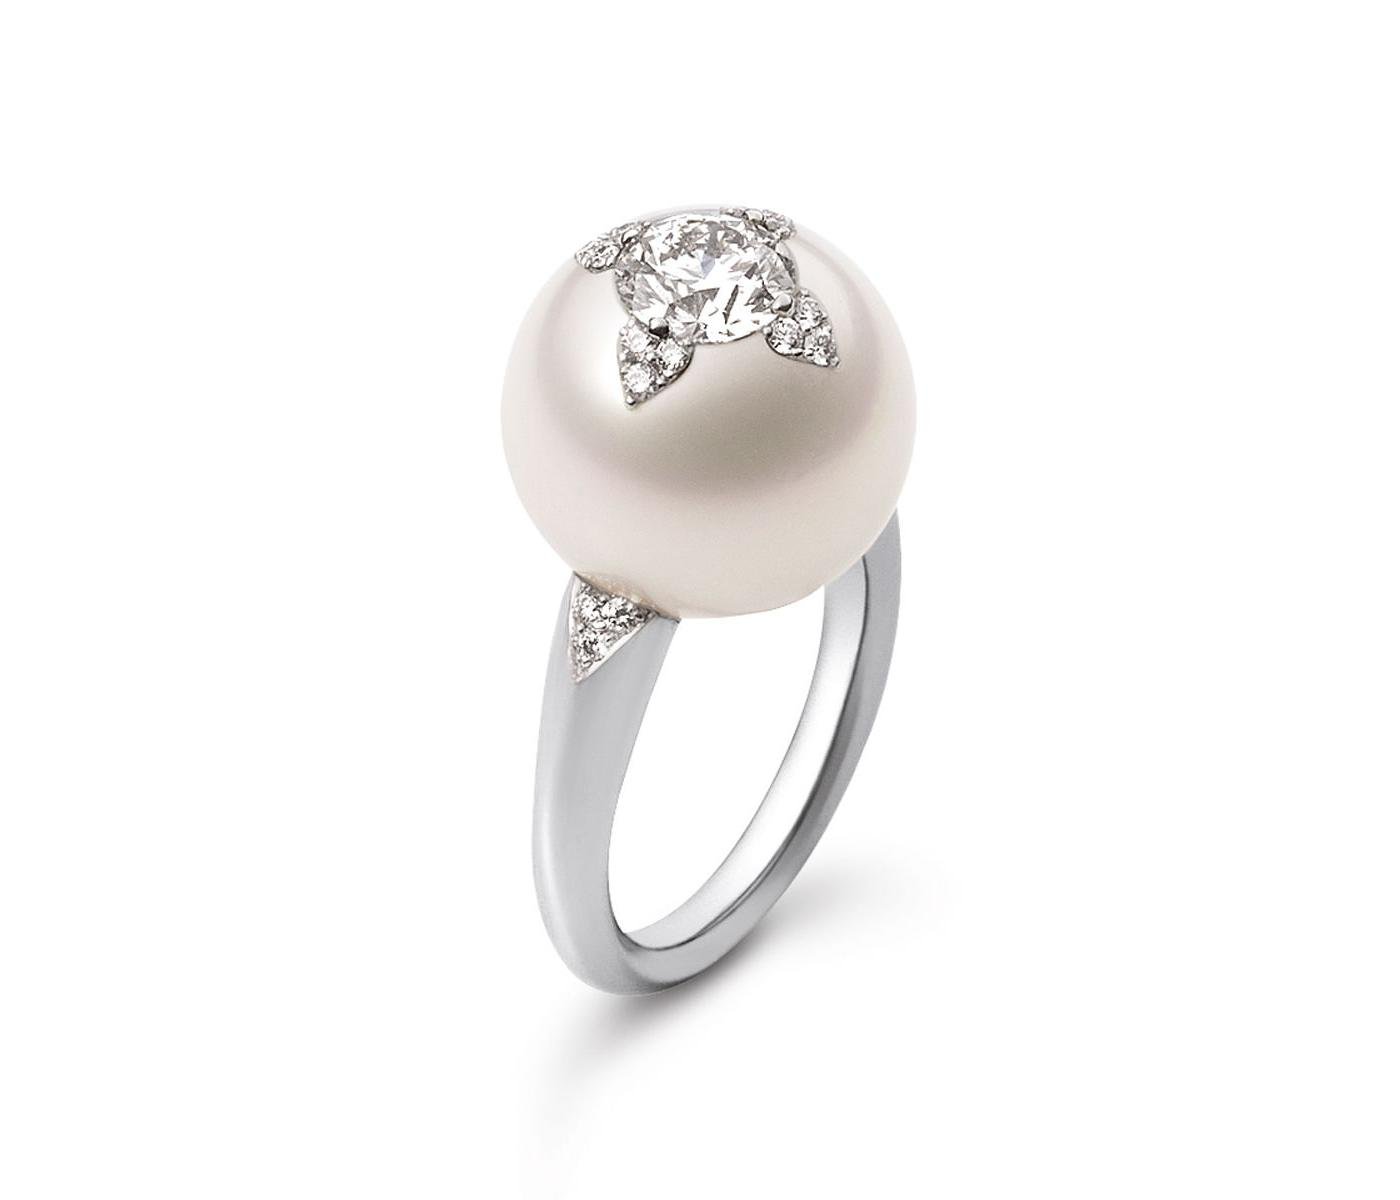 Ring by Mikimoto